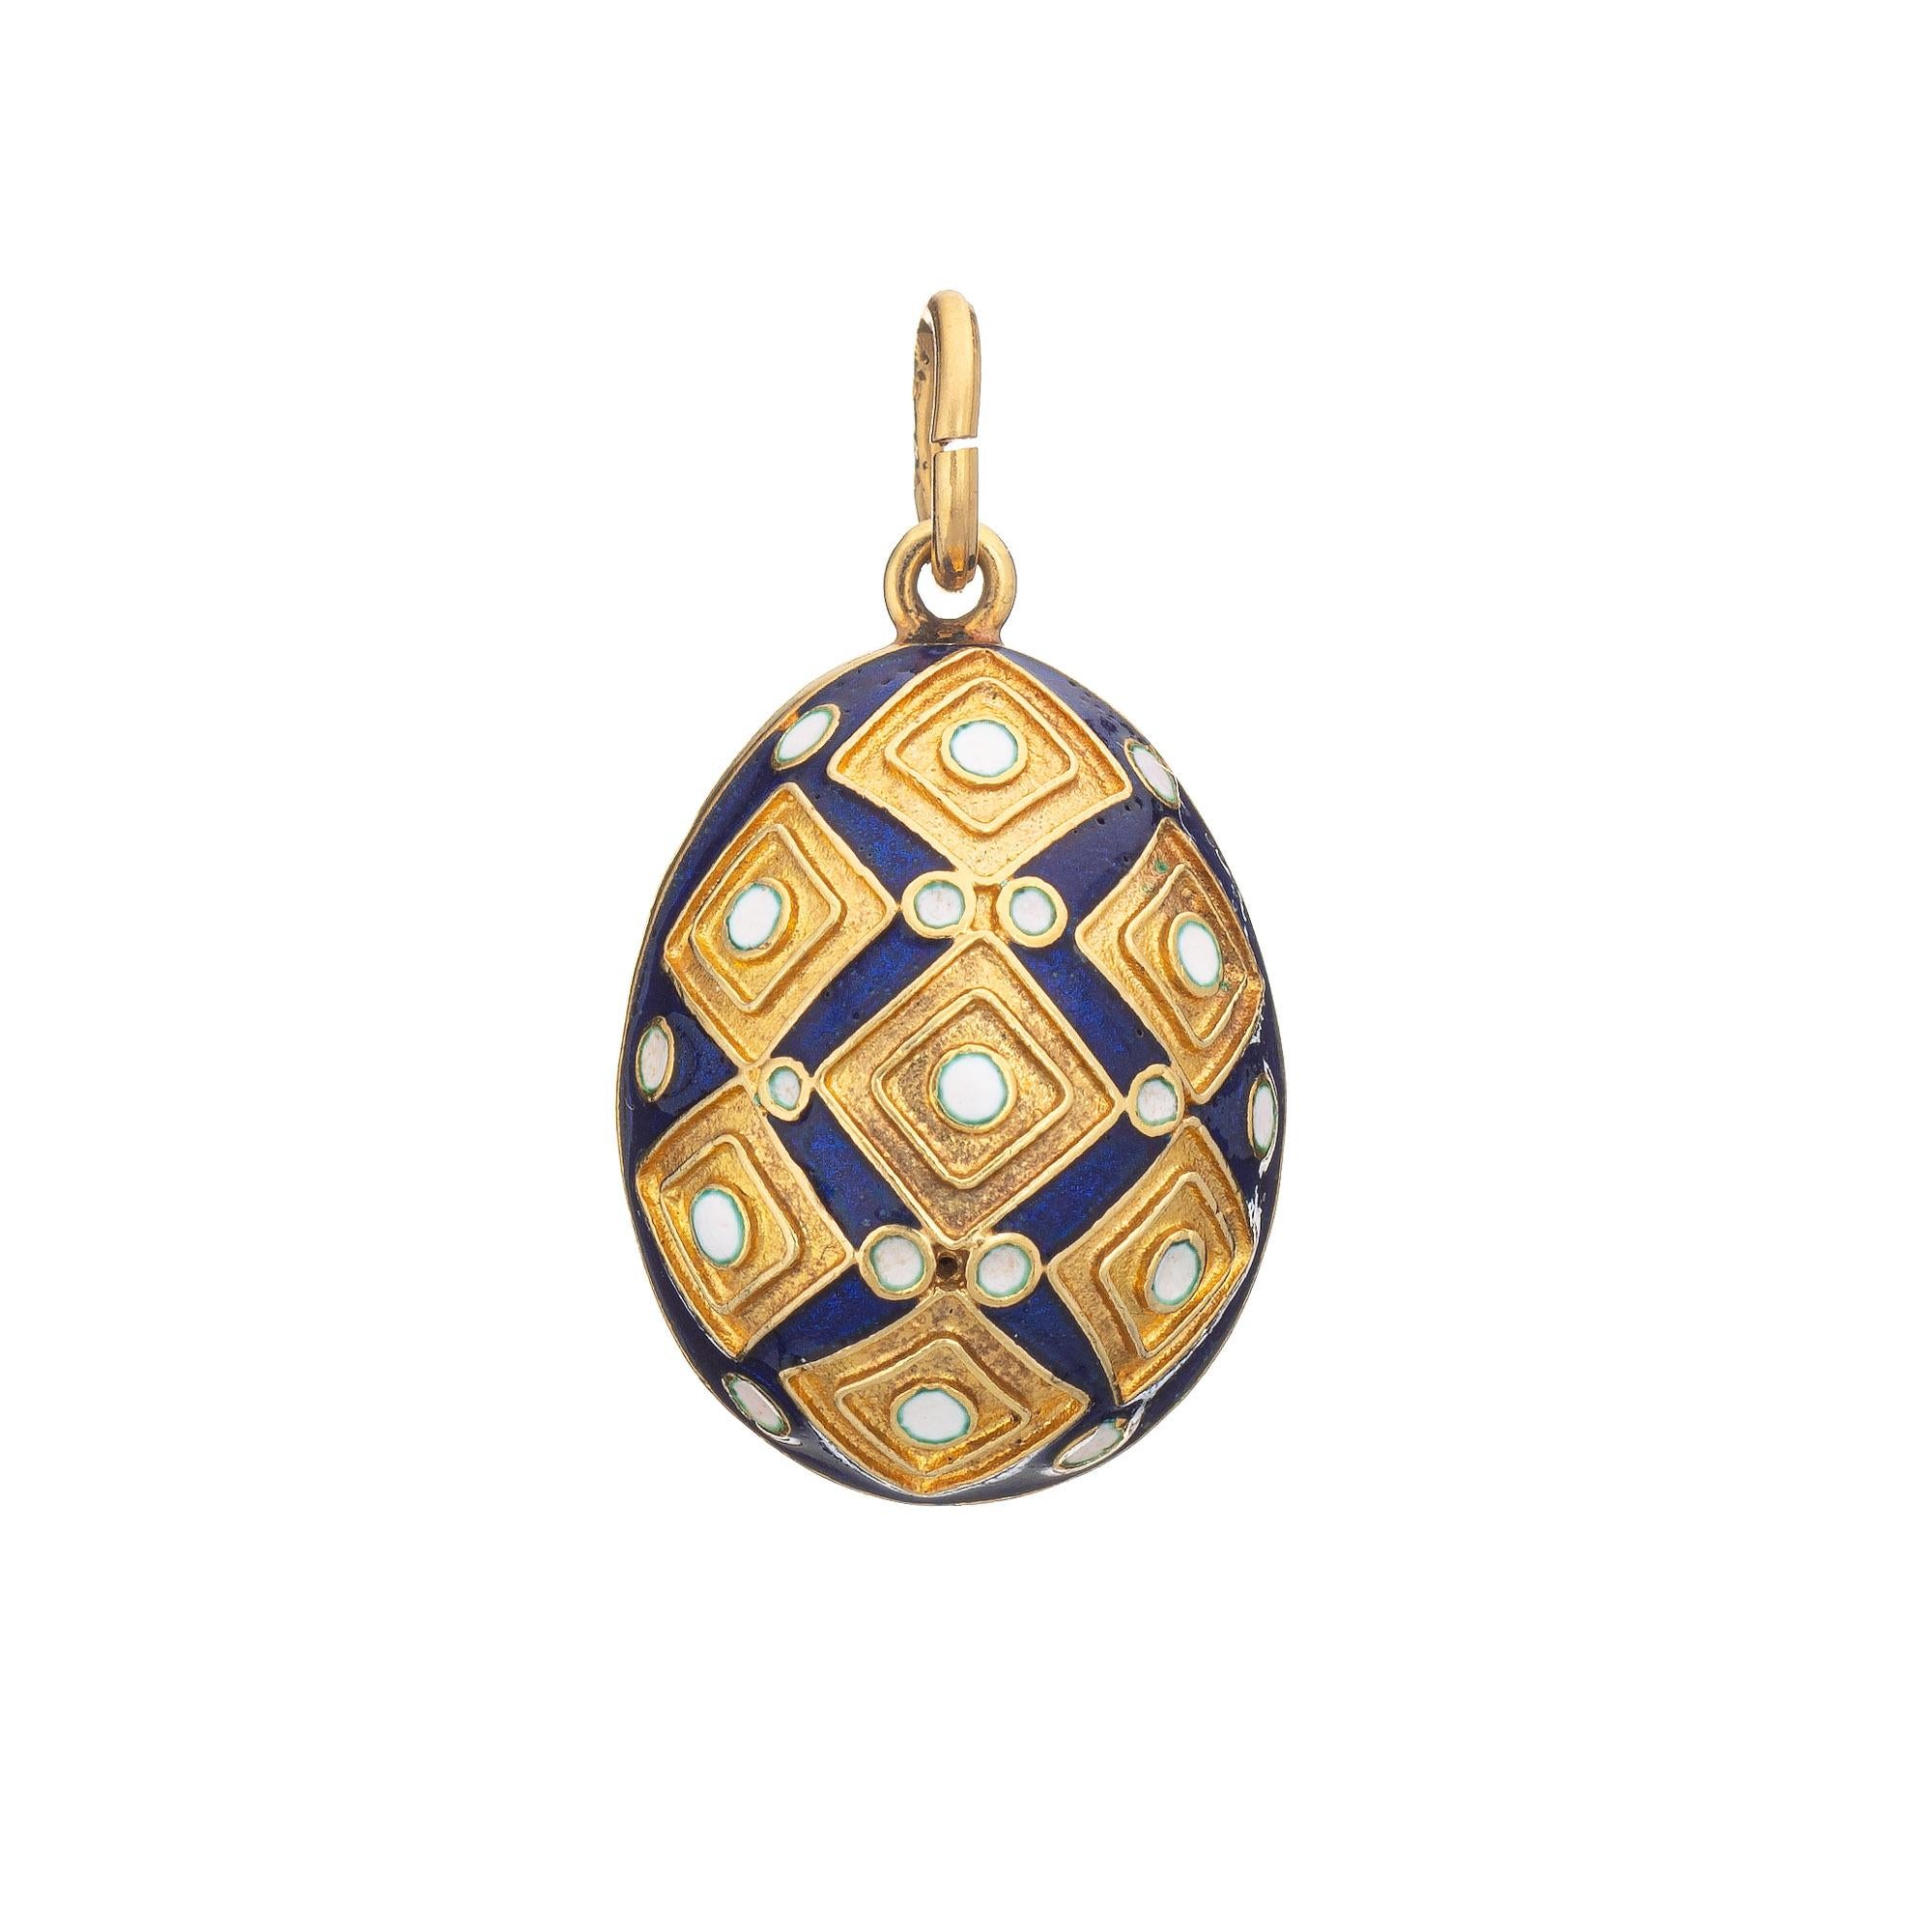 Finely detailed vintage navy blue enameled egg charm crafted in 18k yellow gold (circa 1950s to 1960s).  

The unique charm features a recessed diamond pattern, with navy blue & white enamel detailing. The egg has a 3 dimensional look with a solid